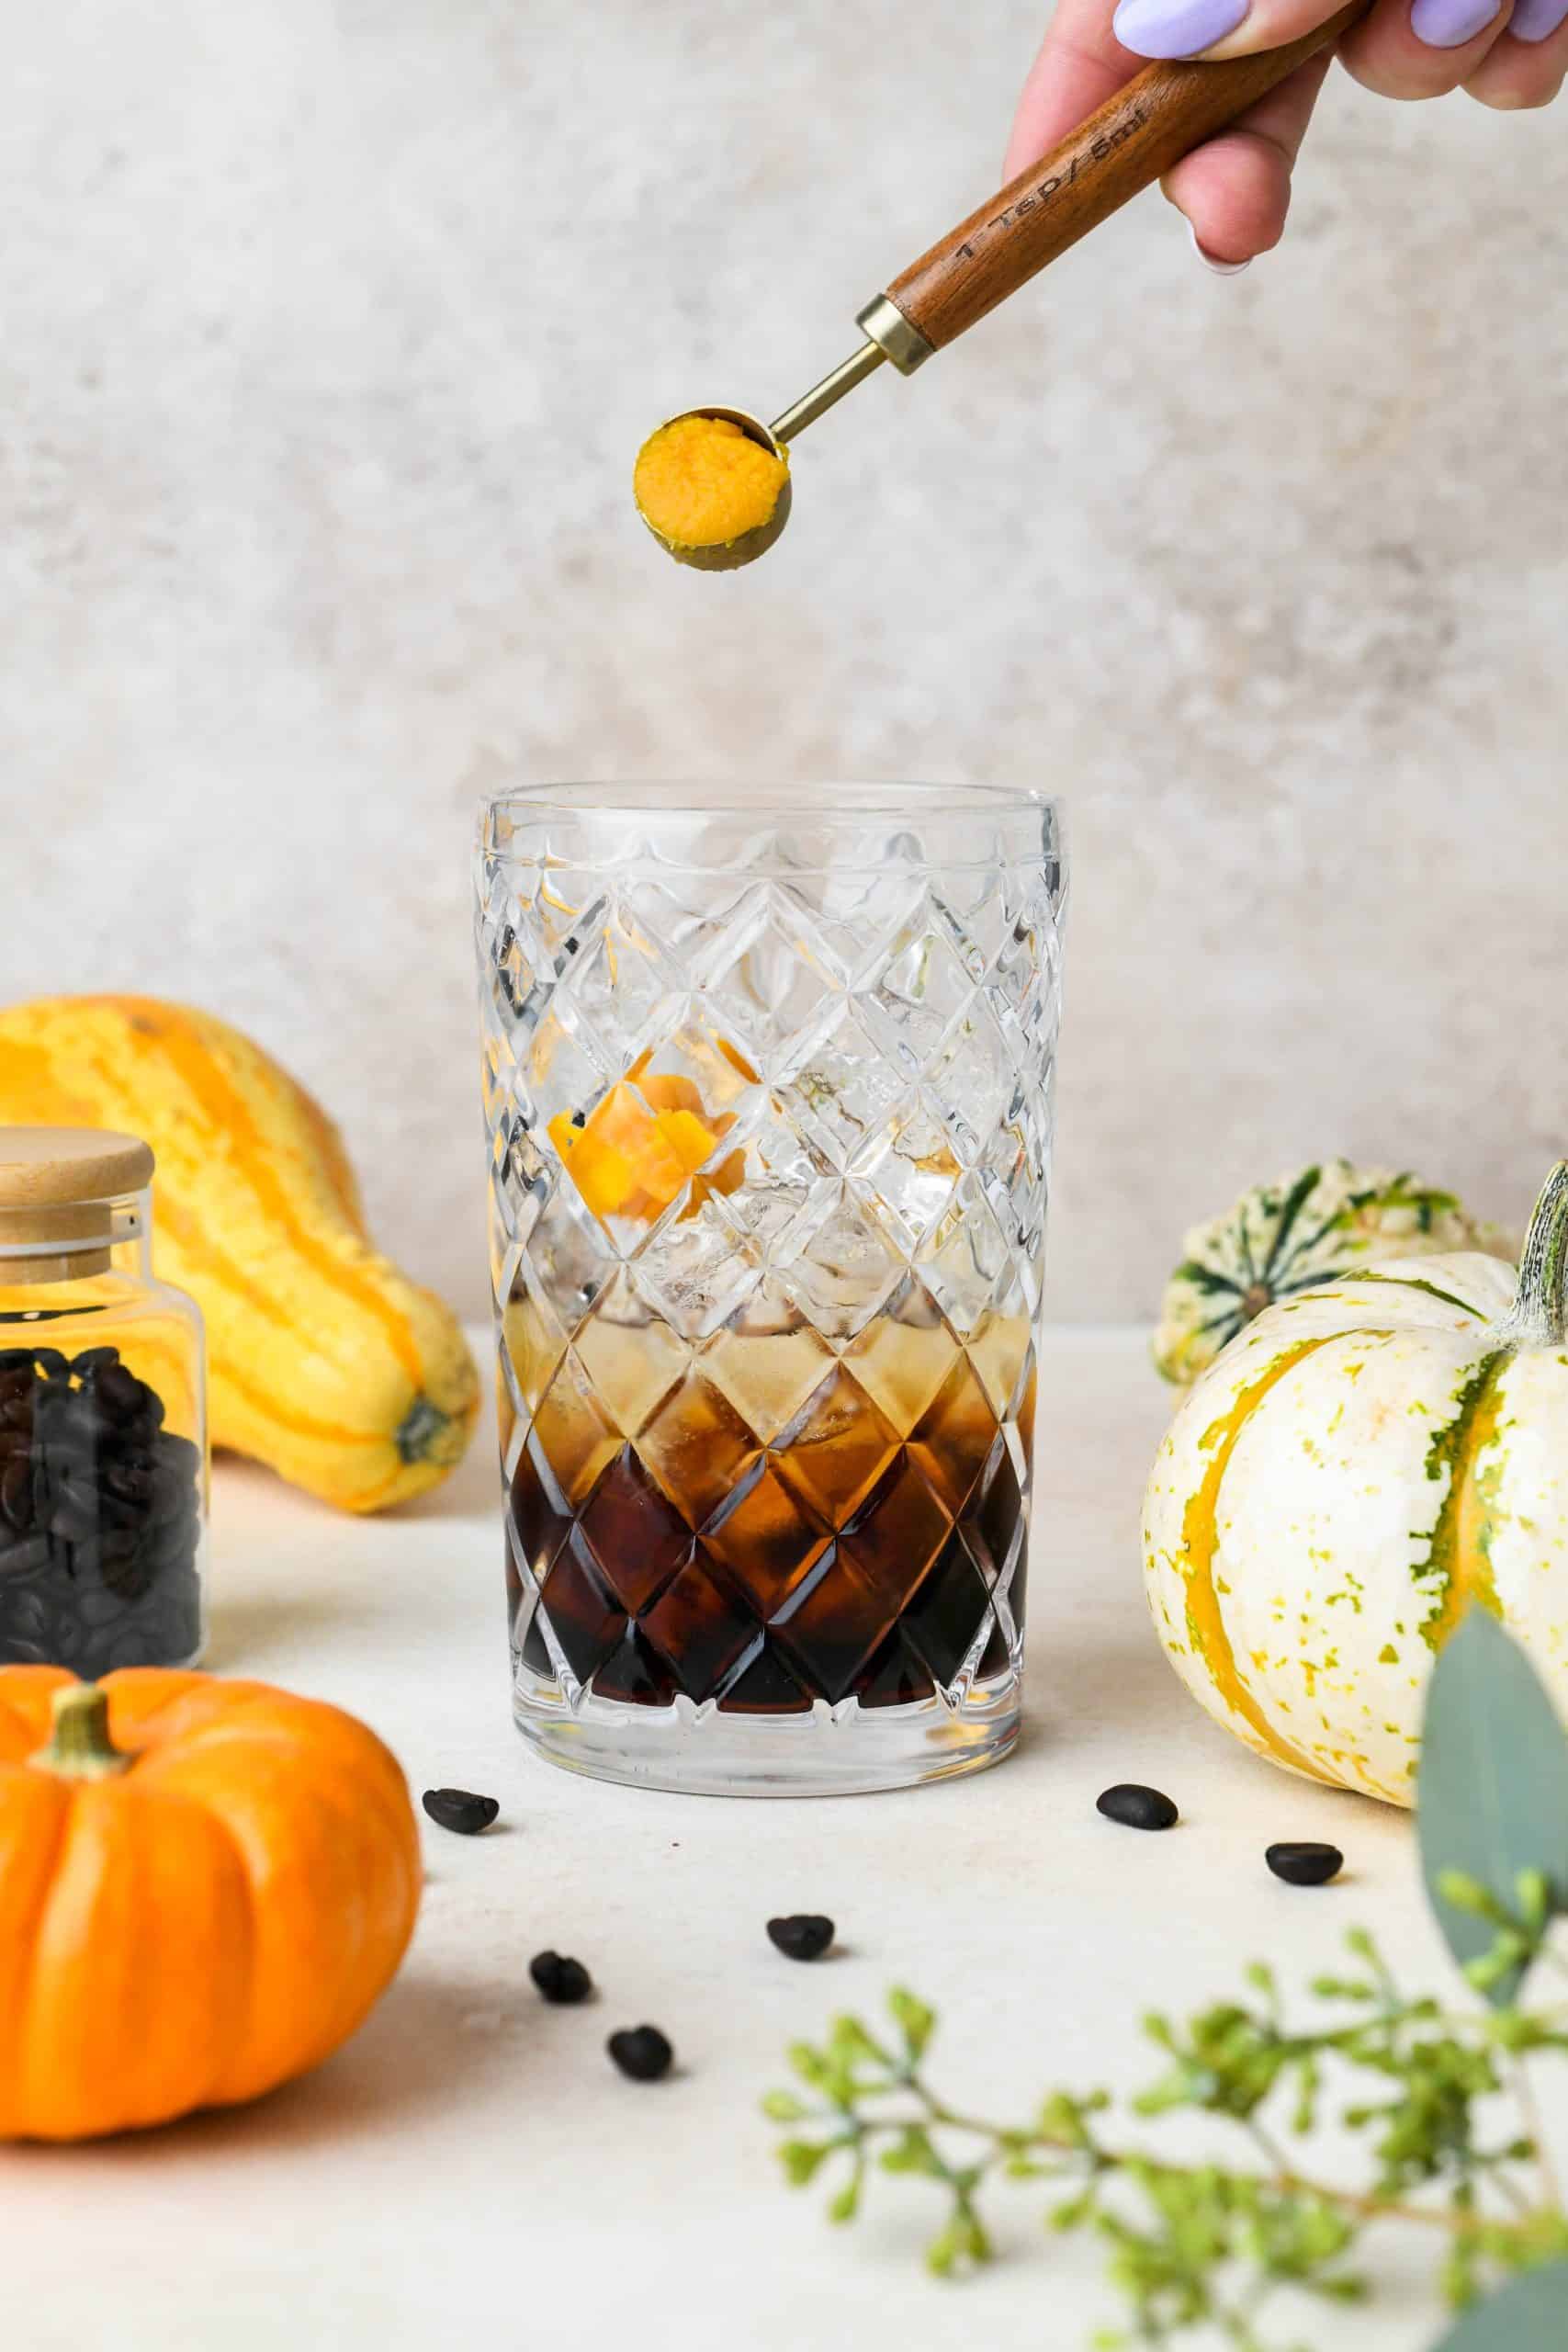 How to make a pumpkin spice espresso martini: Adding pumpkin puree to cocktail shaker with ice.